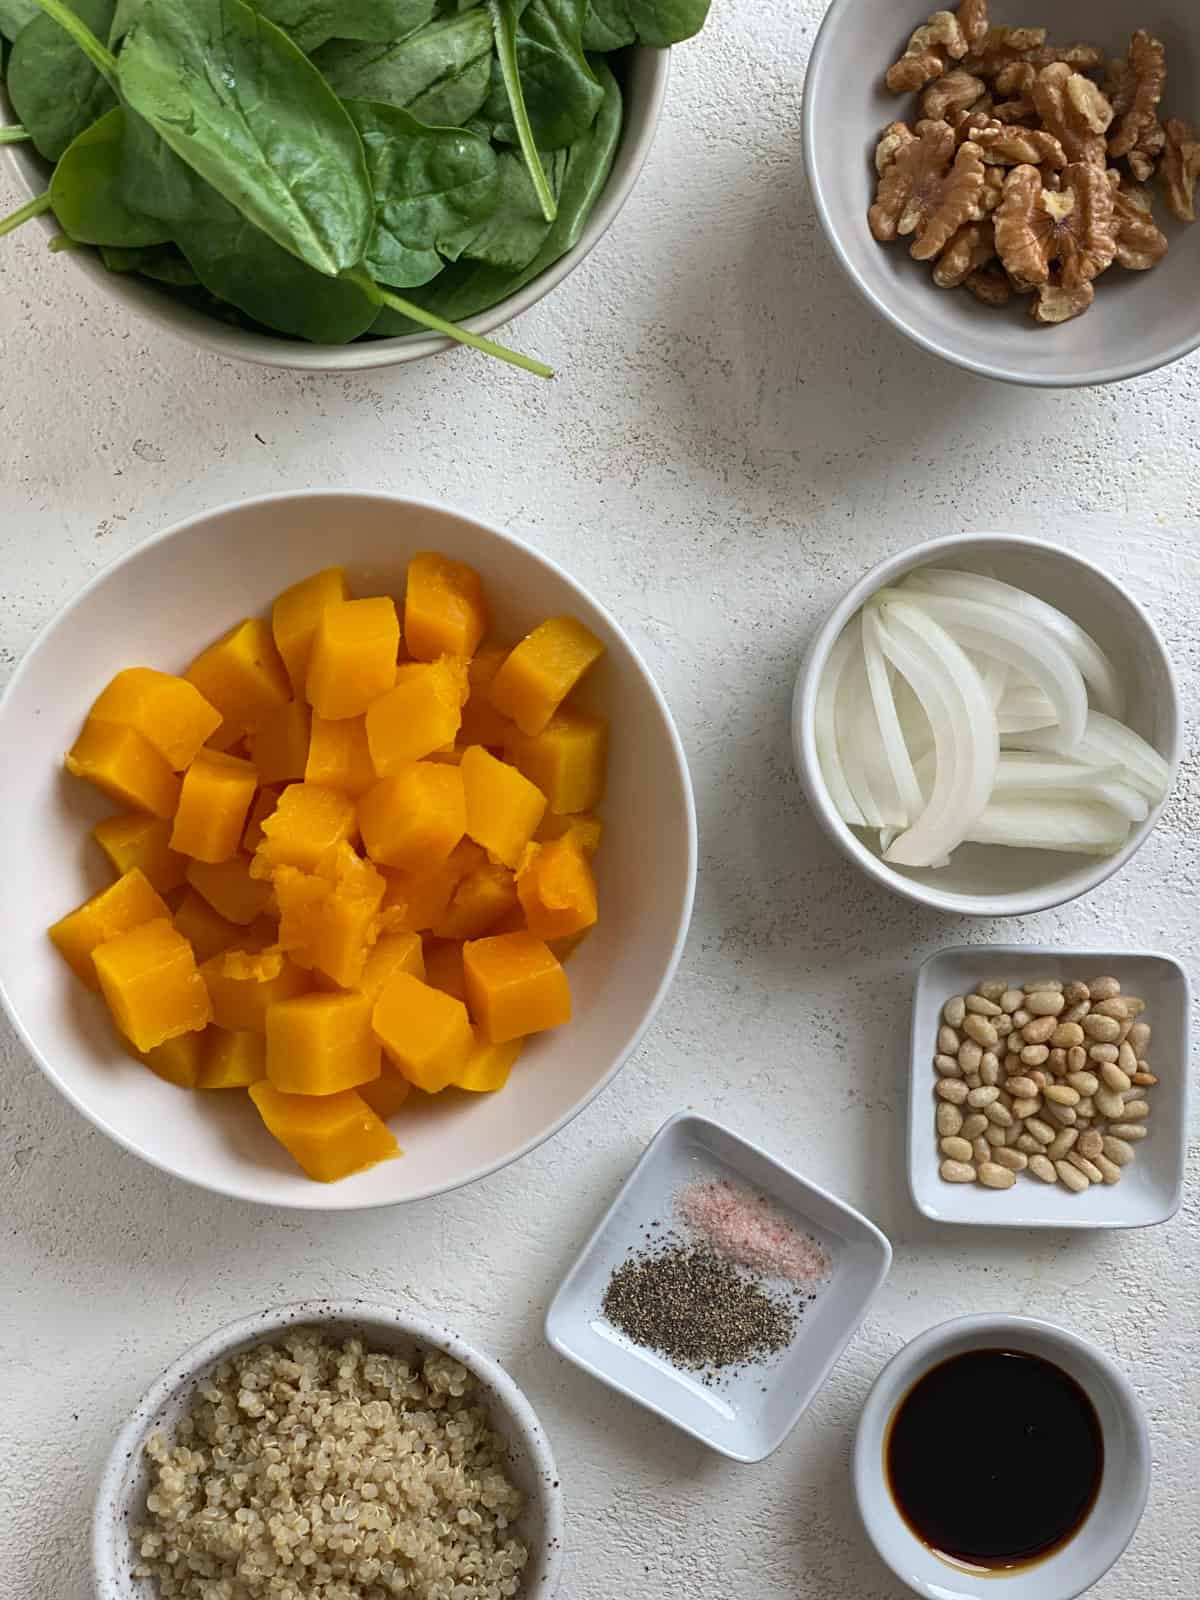 ingredients for Fall Roasted Pumpkin Salad against a white surface